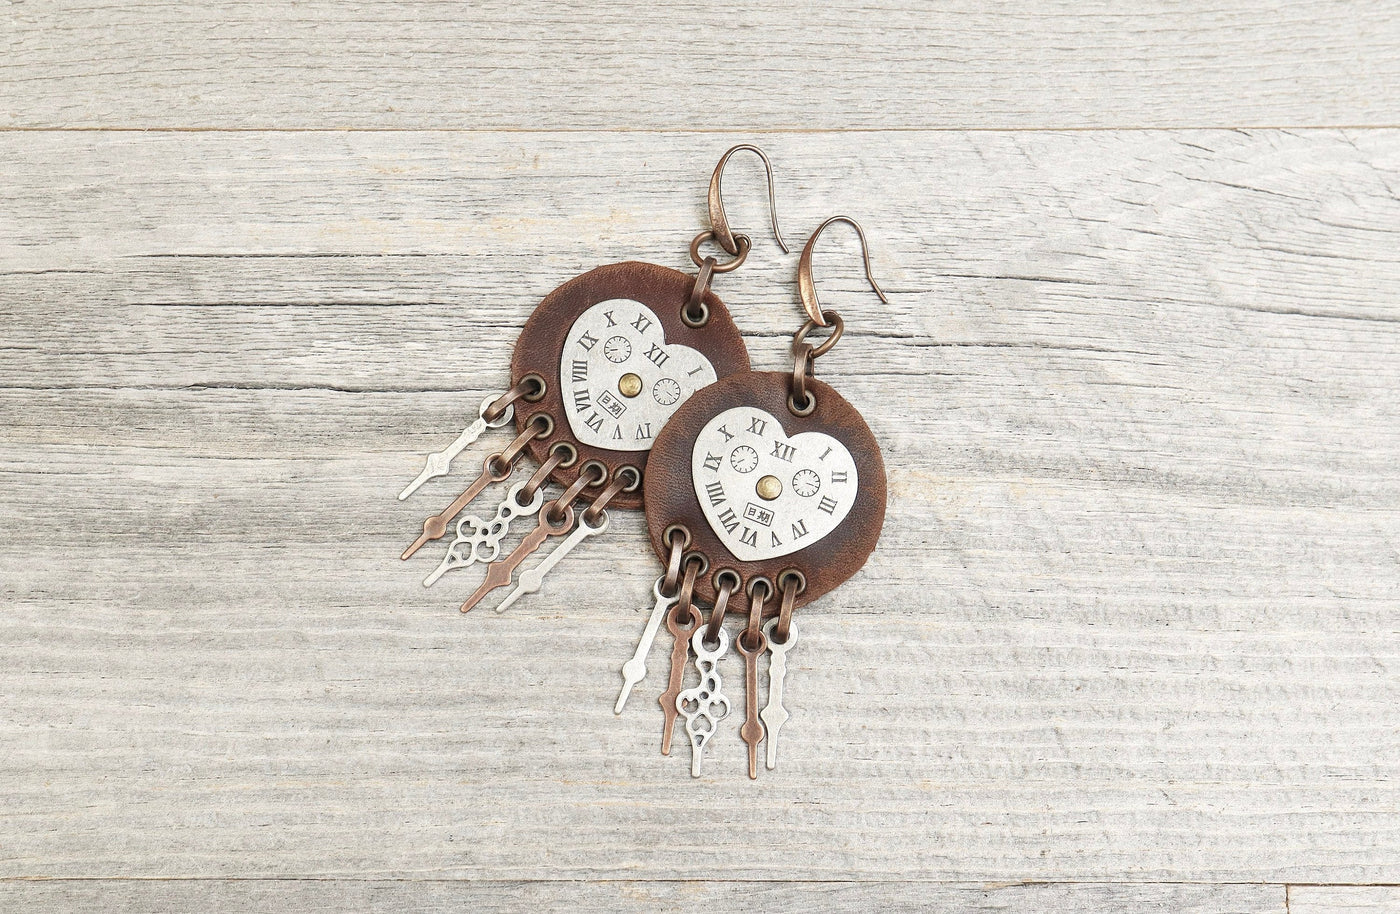 Steampunk Clock Leather Earrings -  Boho Gypsy Earthy Hippie Unique Round Big Disk Circle Watch Statement Bohemian Rustic Handmade Jewelry